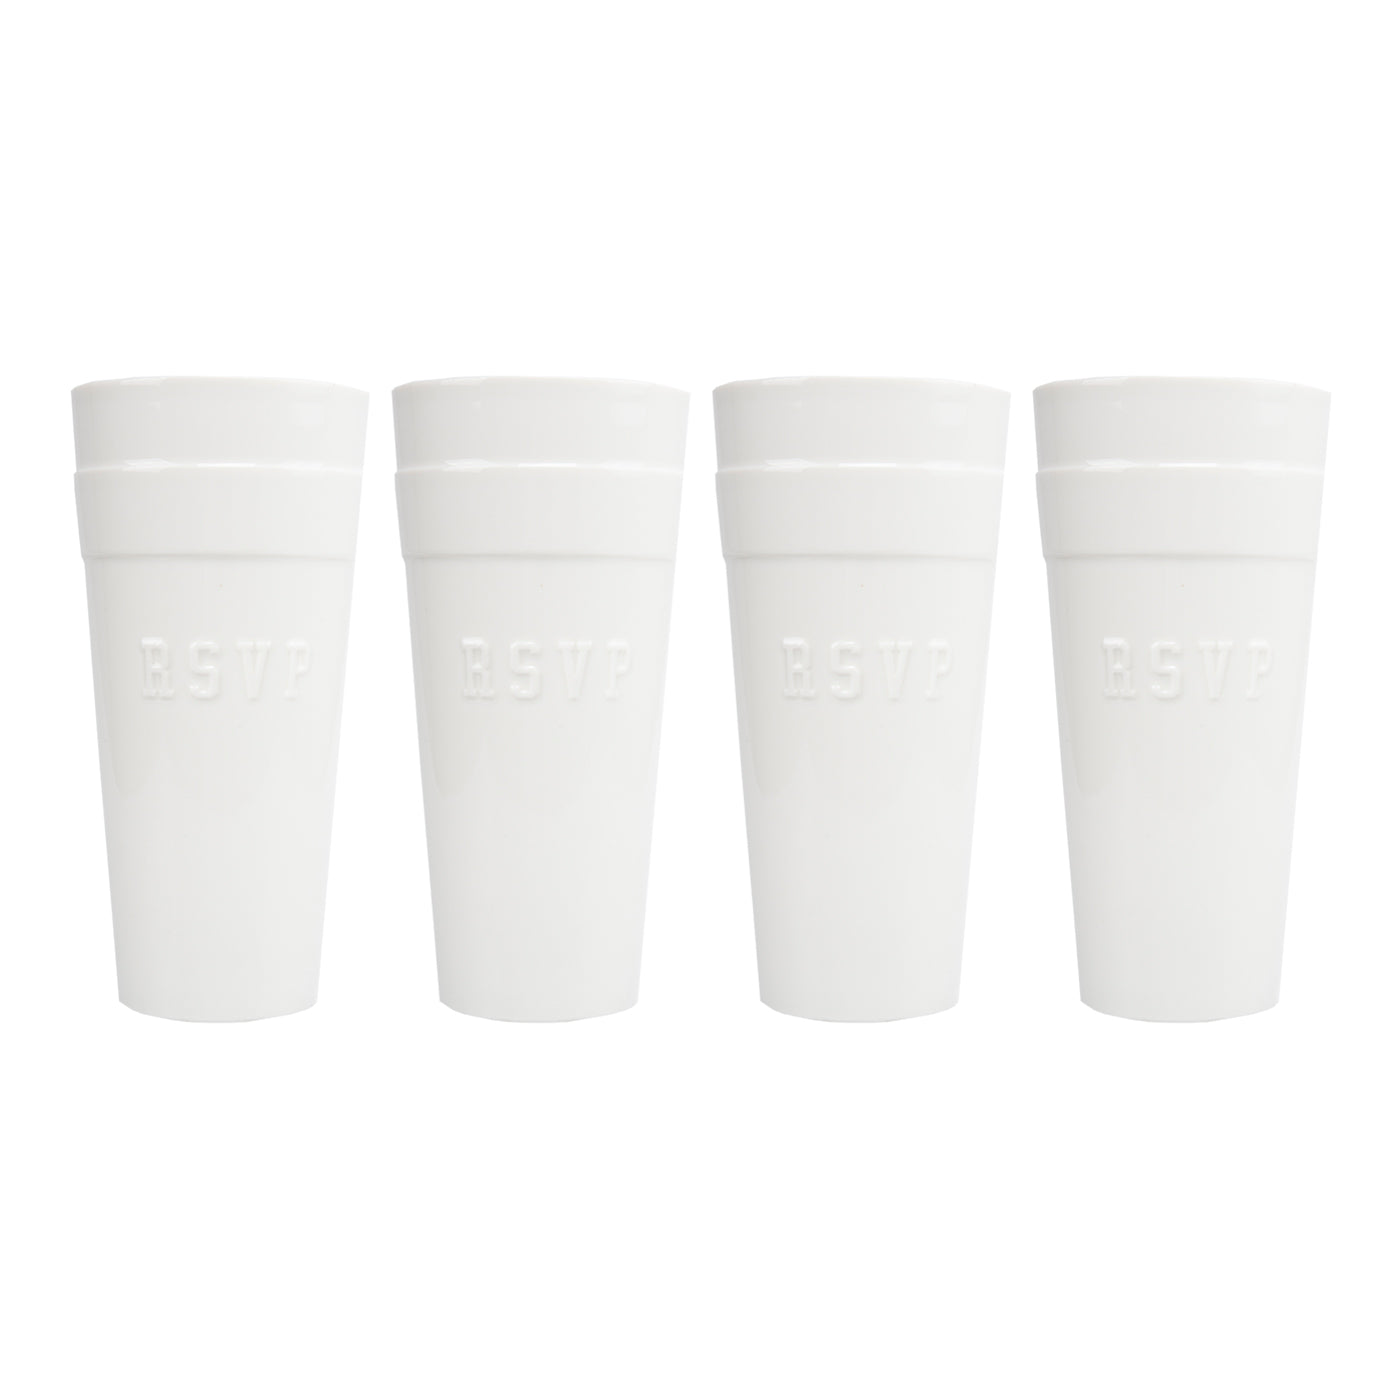 RSVP Gallery Double Cup Set, White